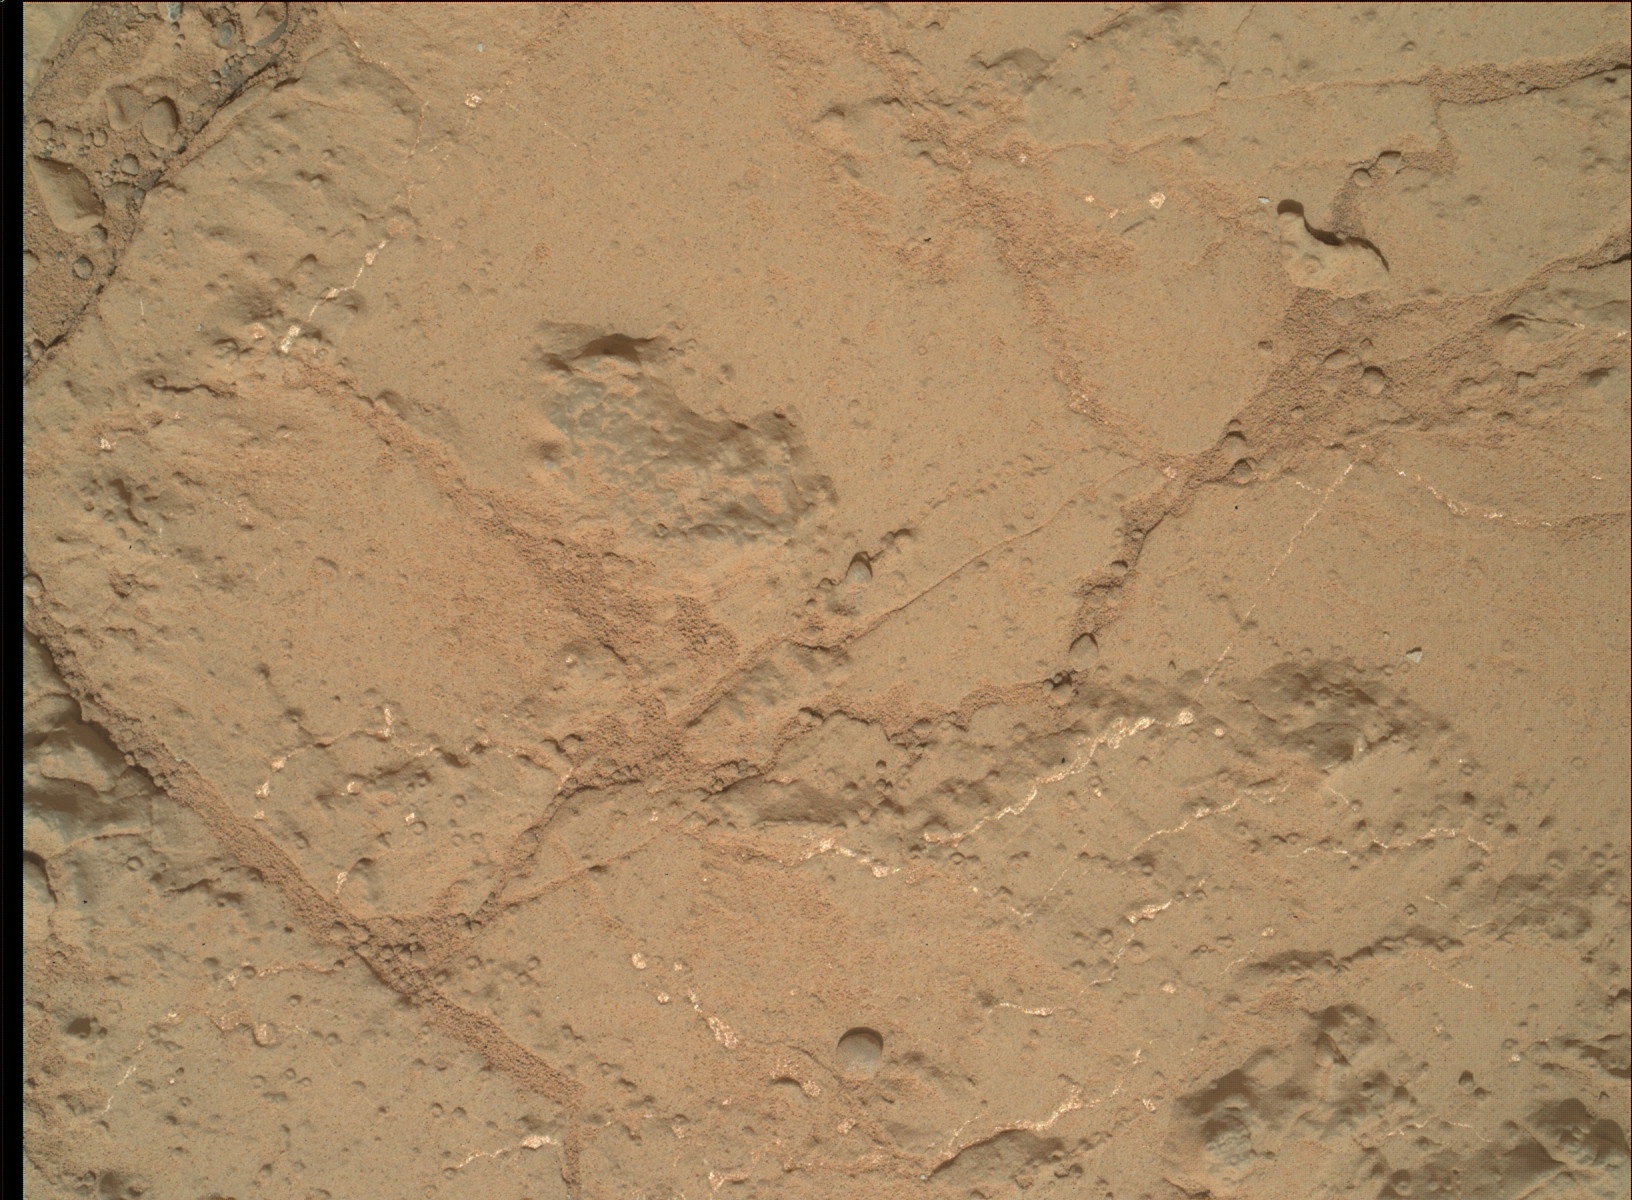 Nasa's Mars rover Curiosity acquired this image using its Mars Hand Lens Imager (MAHLI) on Sol 181